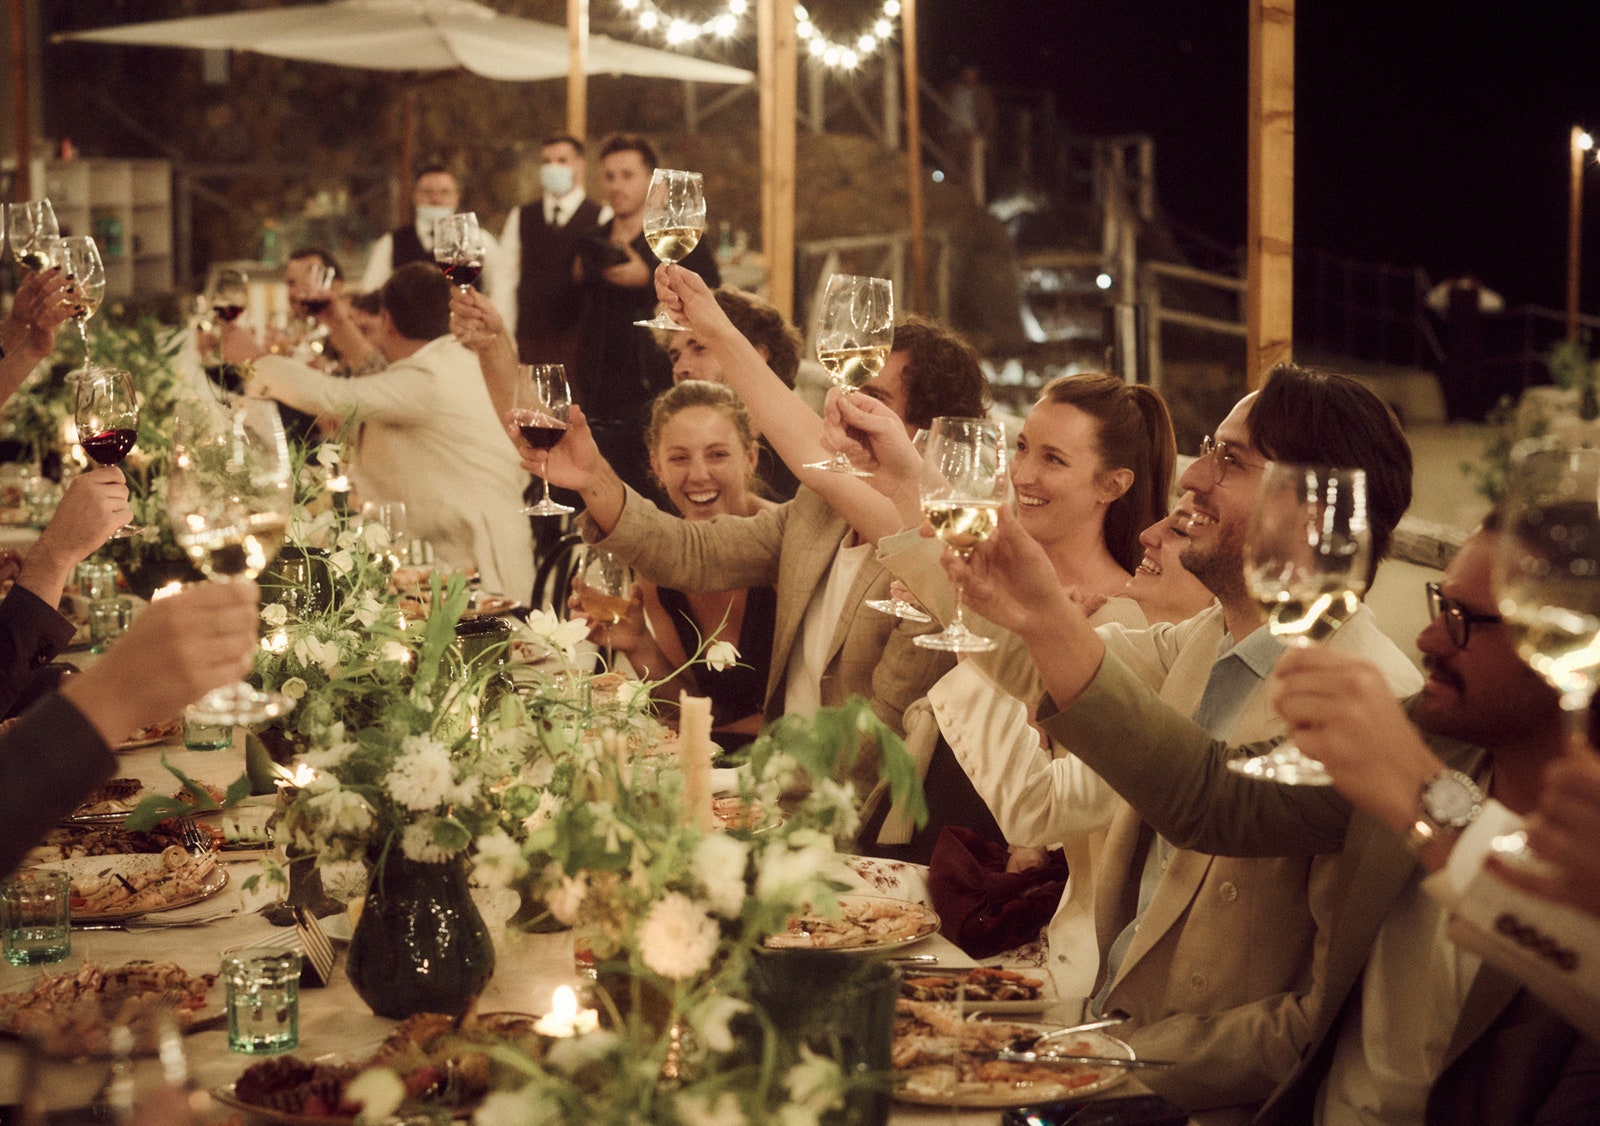 a dinner party for an engagement | Wedifys